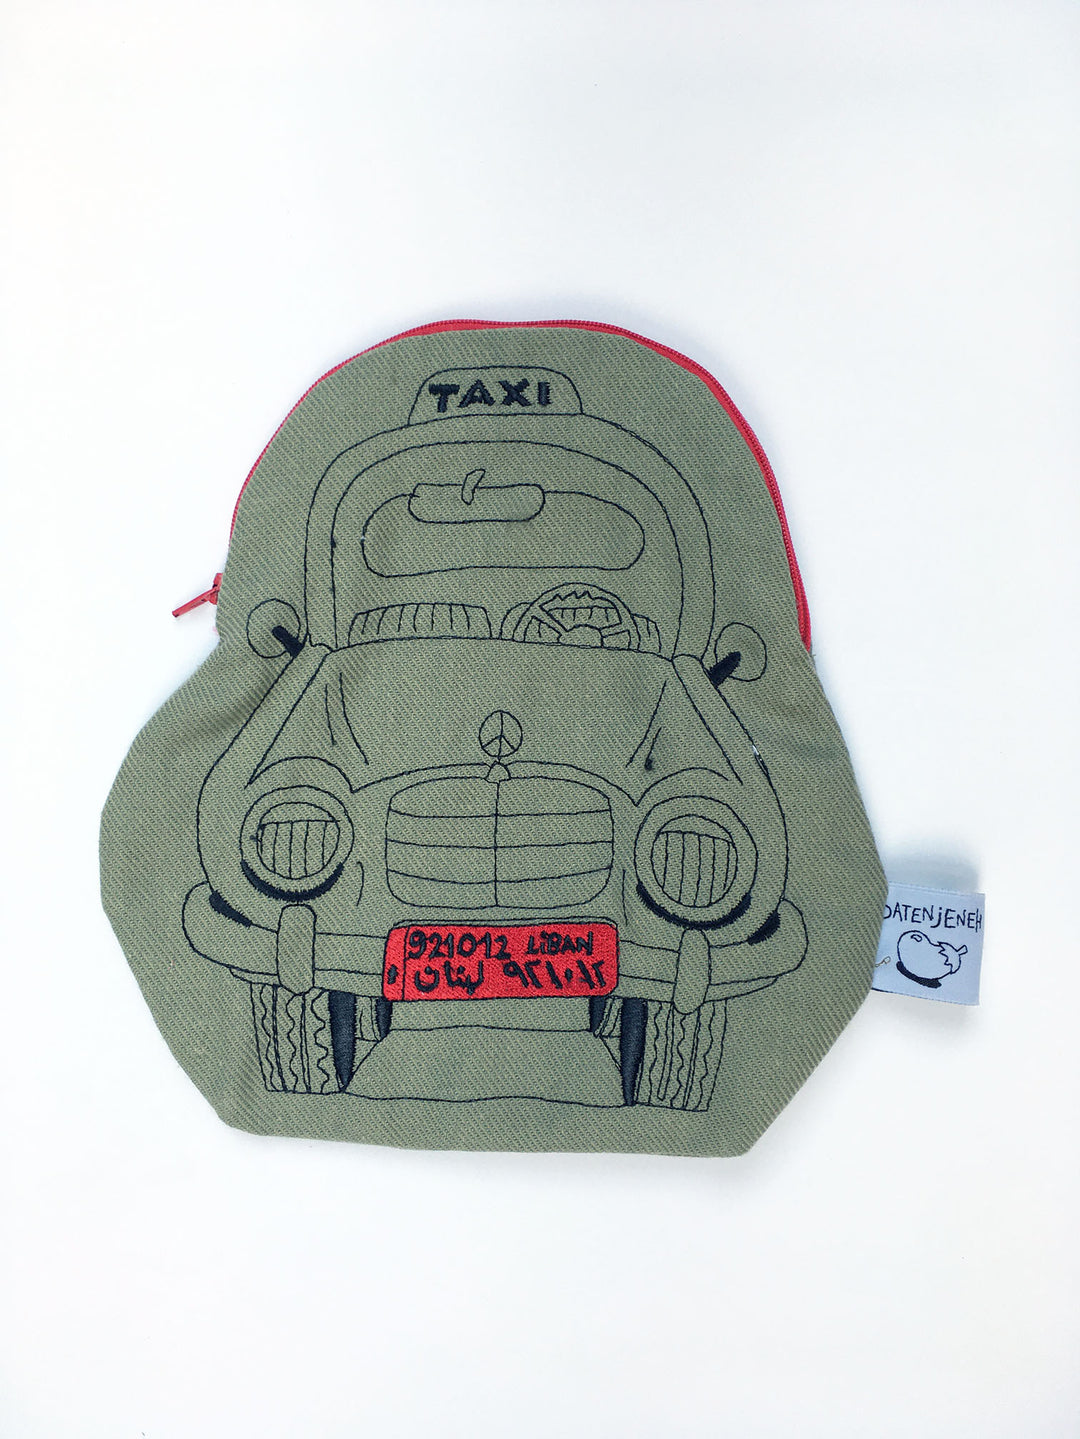 Taxi Zip Pouch